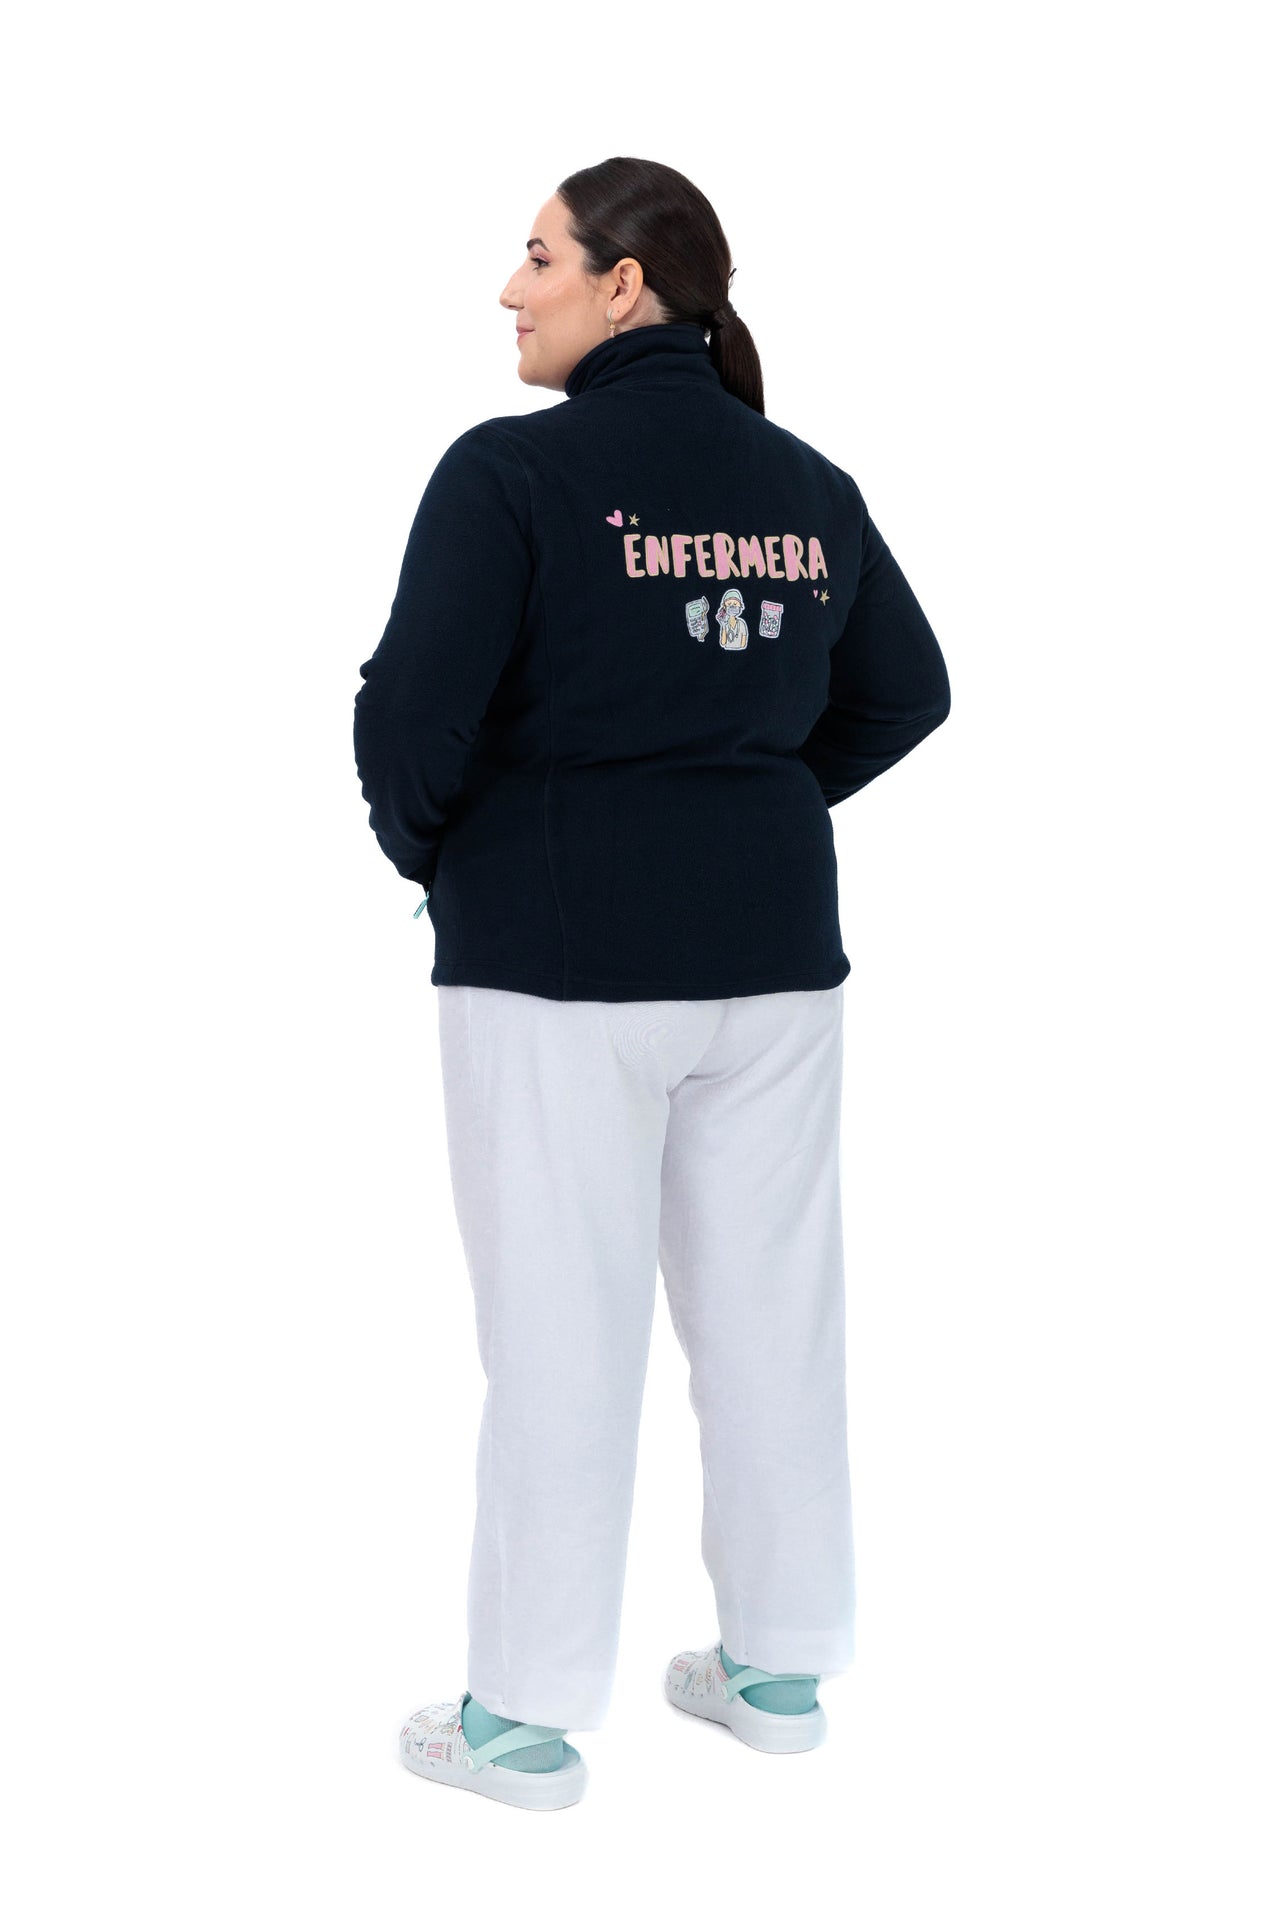 FLEECE JACKET "ENFERMERA" - A/W23 (PREORDER, SHIPPING STARTING FROM 16/05/2024)